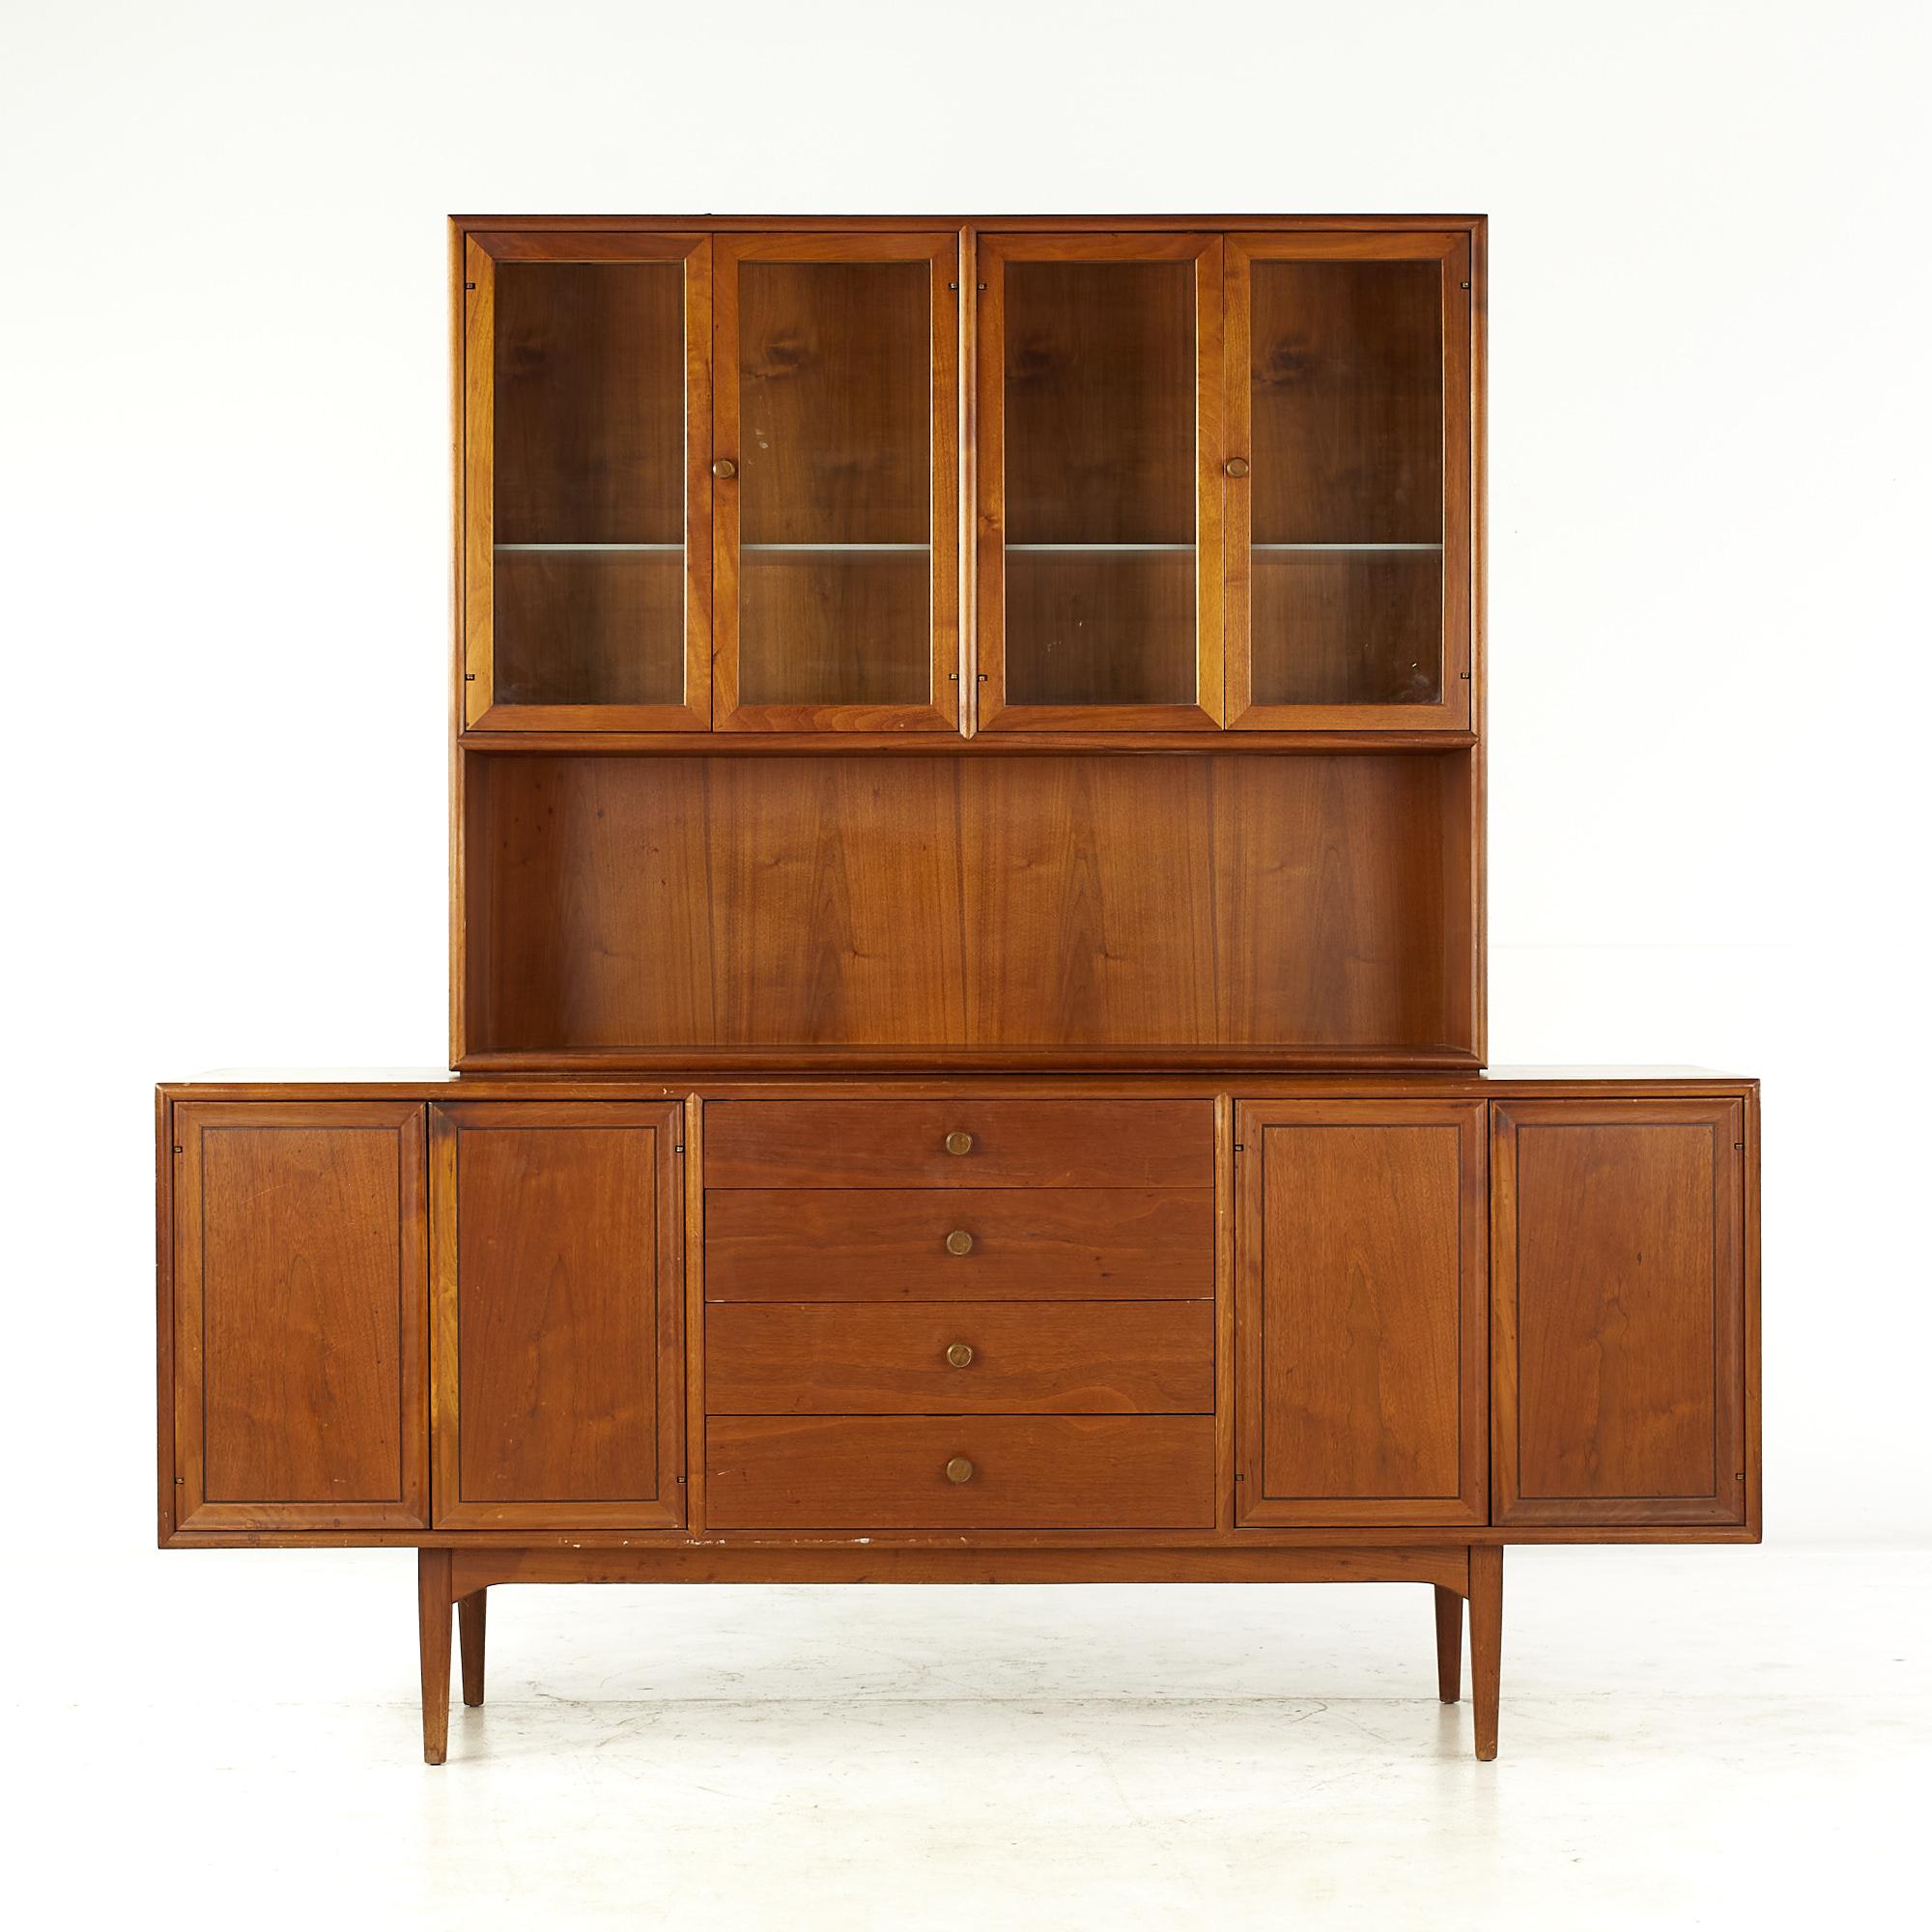 Kipp Stewart for Drexel declaration mid century walnut buffet with hutch.

The buffet measures: 72.25 wide x 20 deep x 31 inches high
The hutch measures: 48.5 wide x 12 deep x 40 inches high
The combined height of the buffet and hutch is